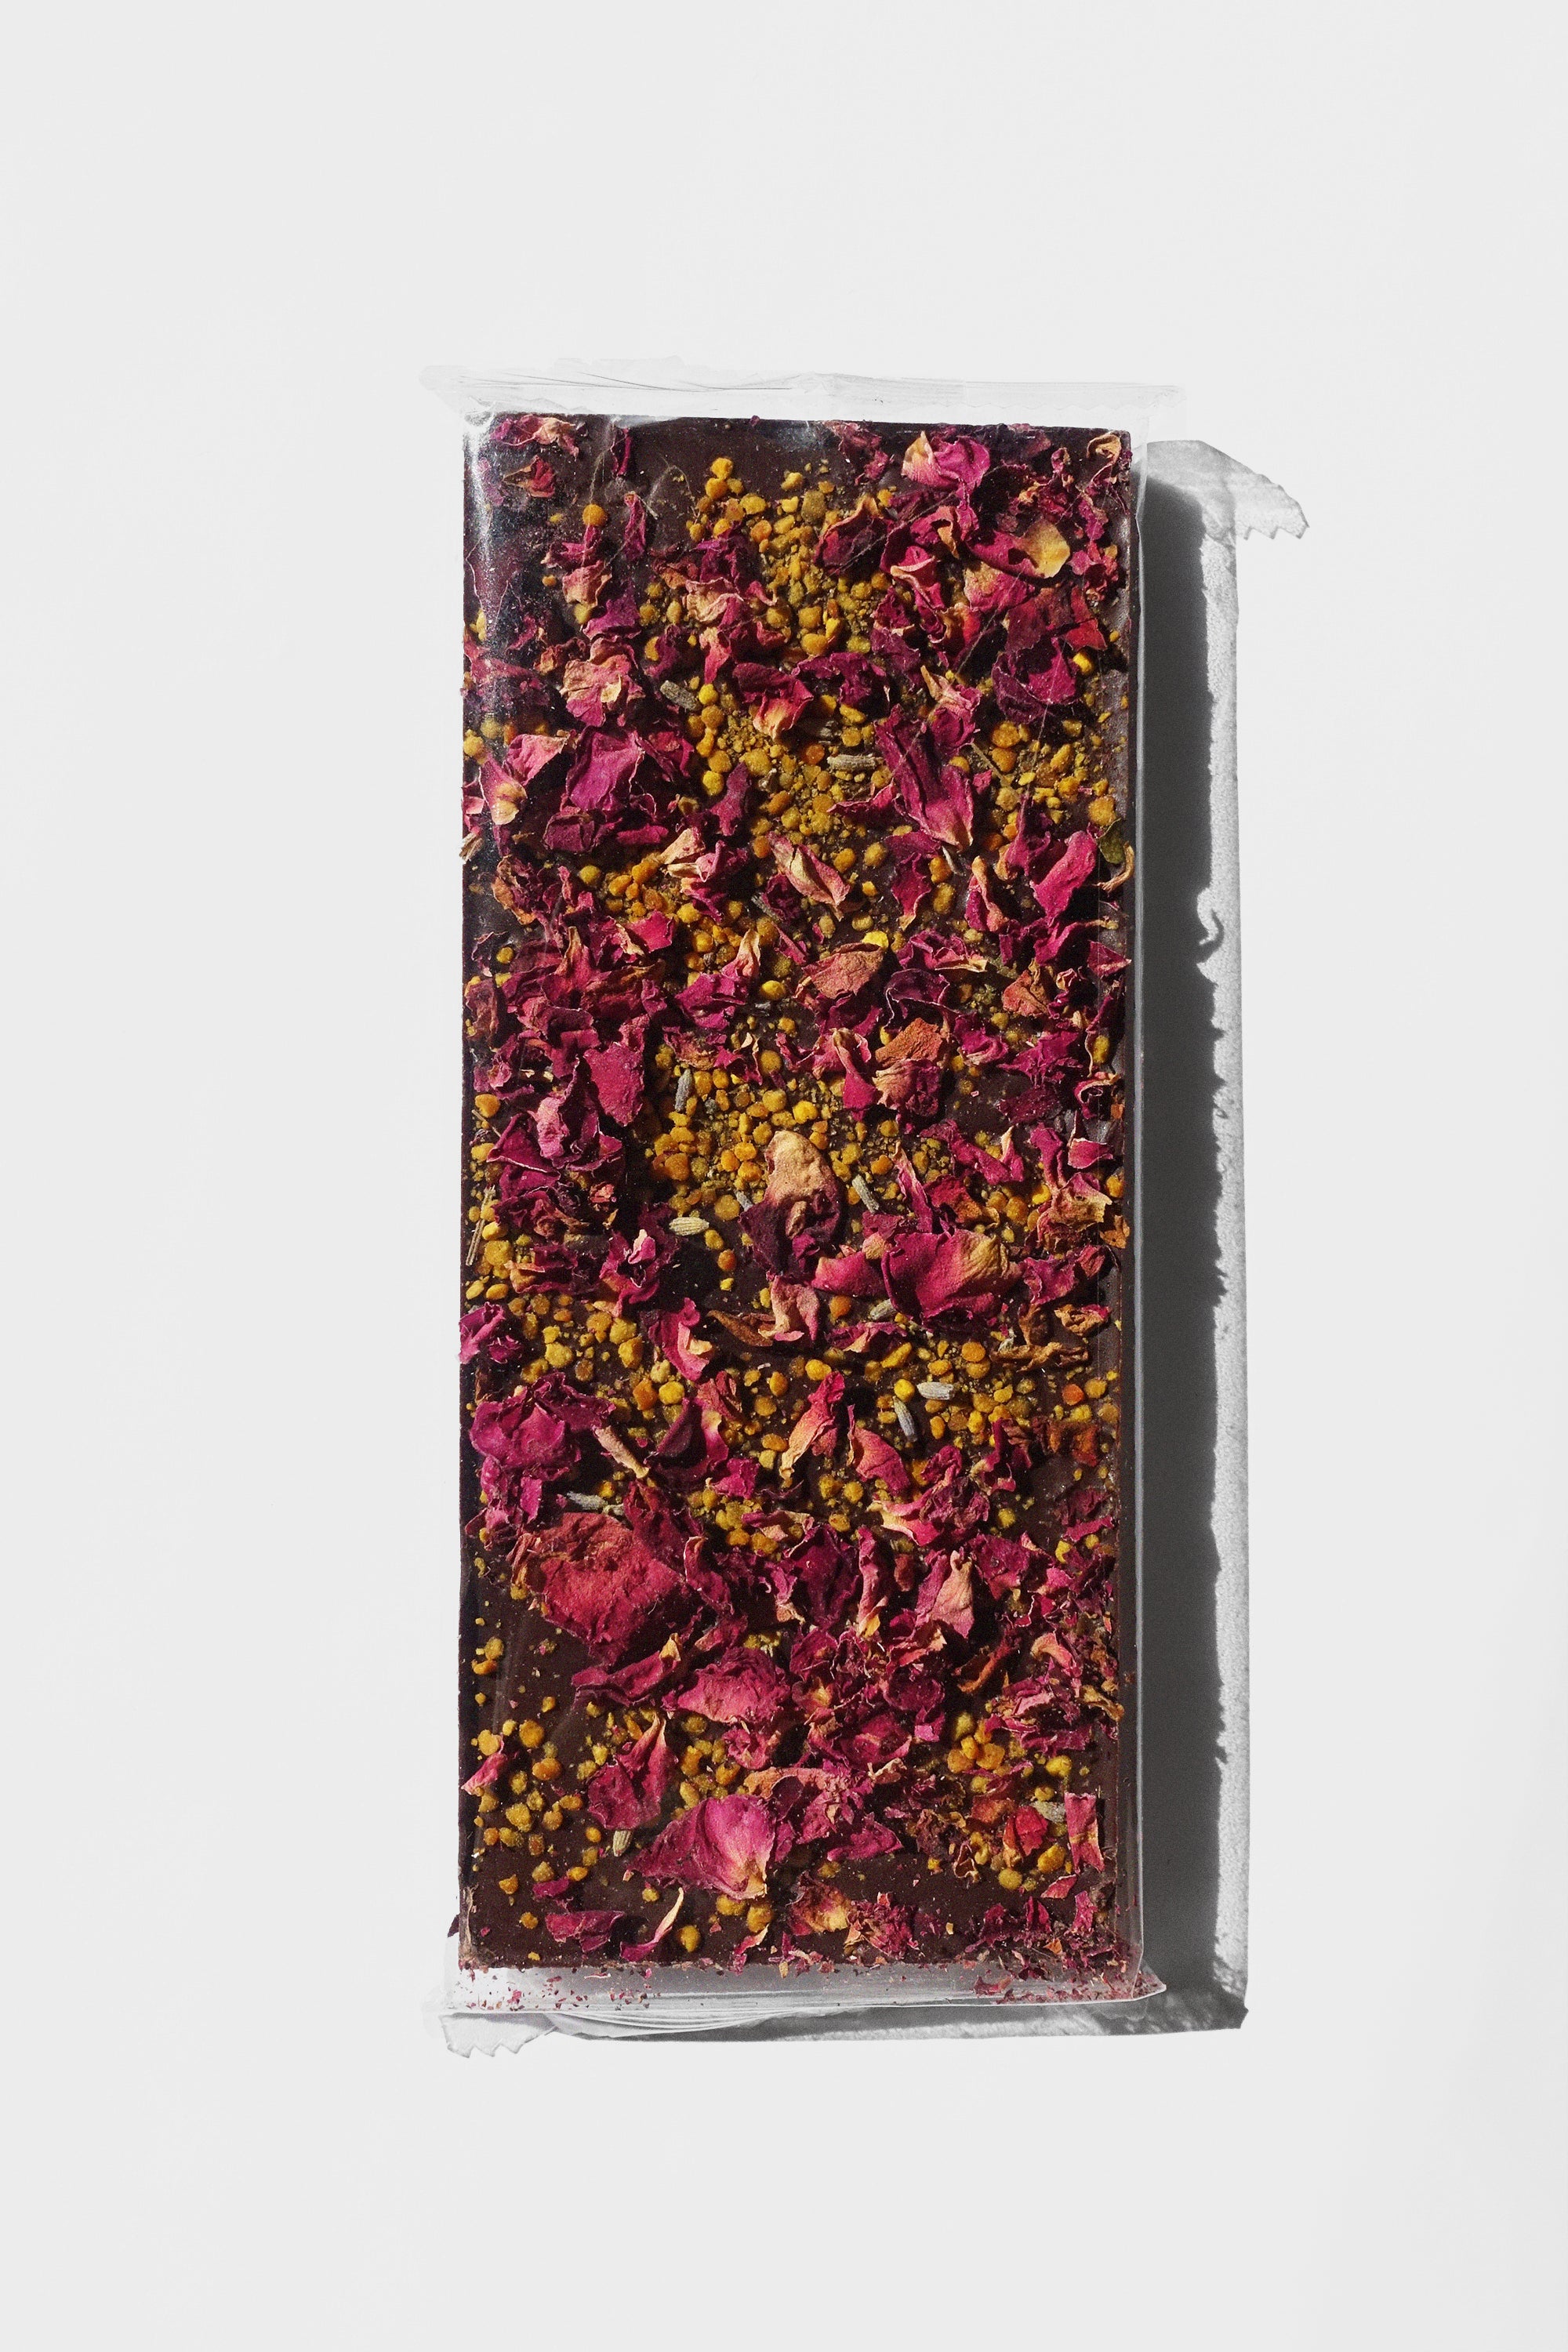 Lavender, Bee Pollen, Rose Petal: Date Sweetened Chocolate Bar by Spring & Mulberry